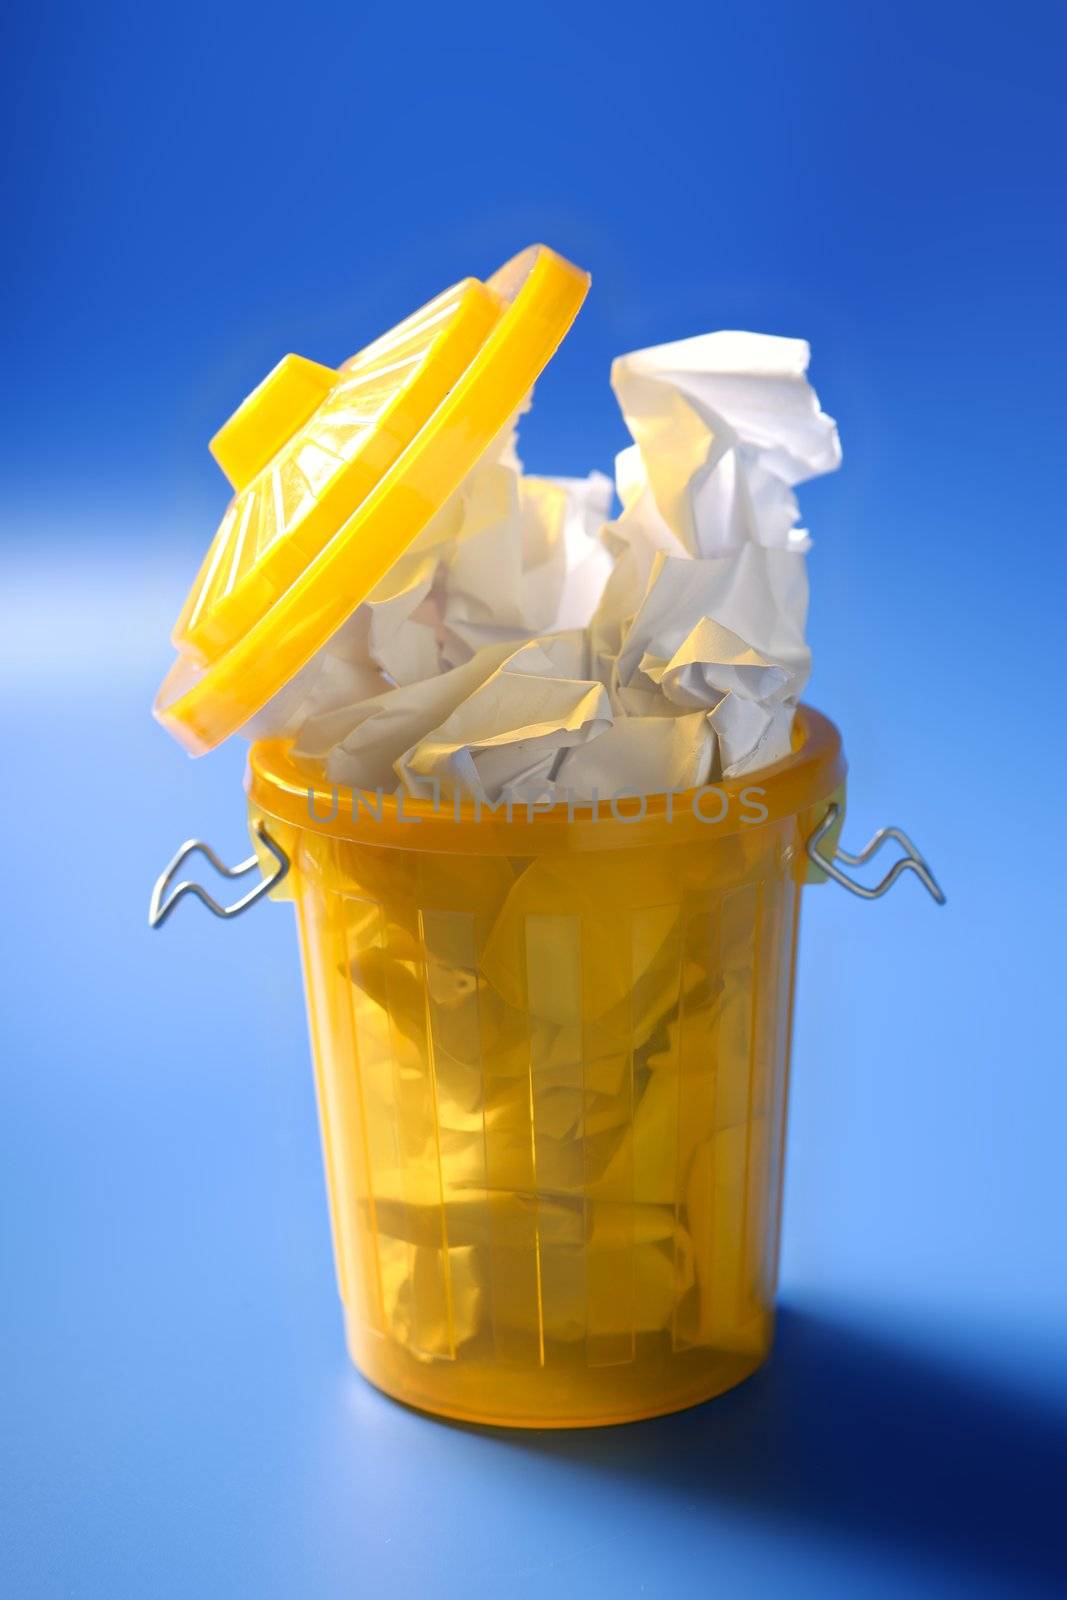 Paper trash in yellow over blue background, business metaphor